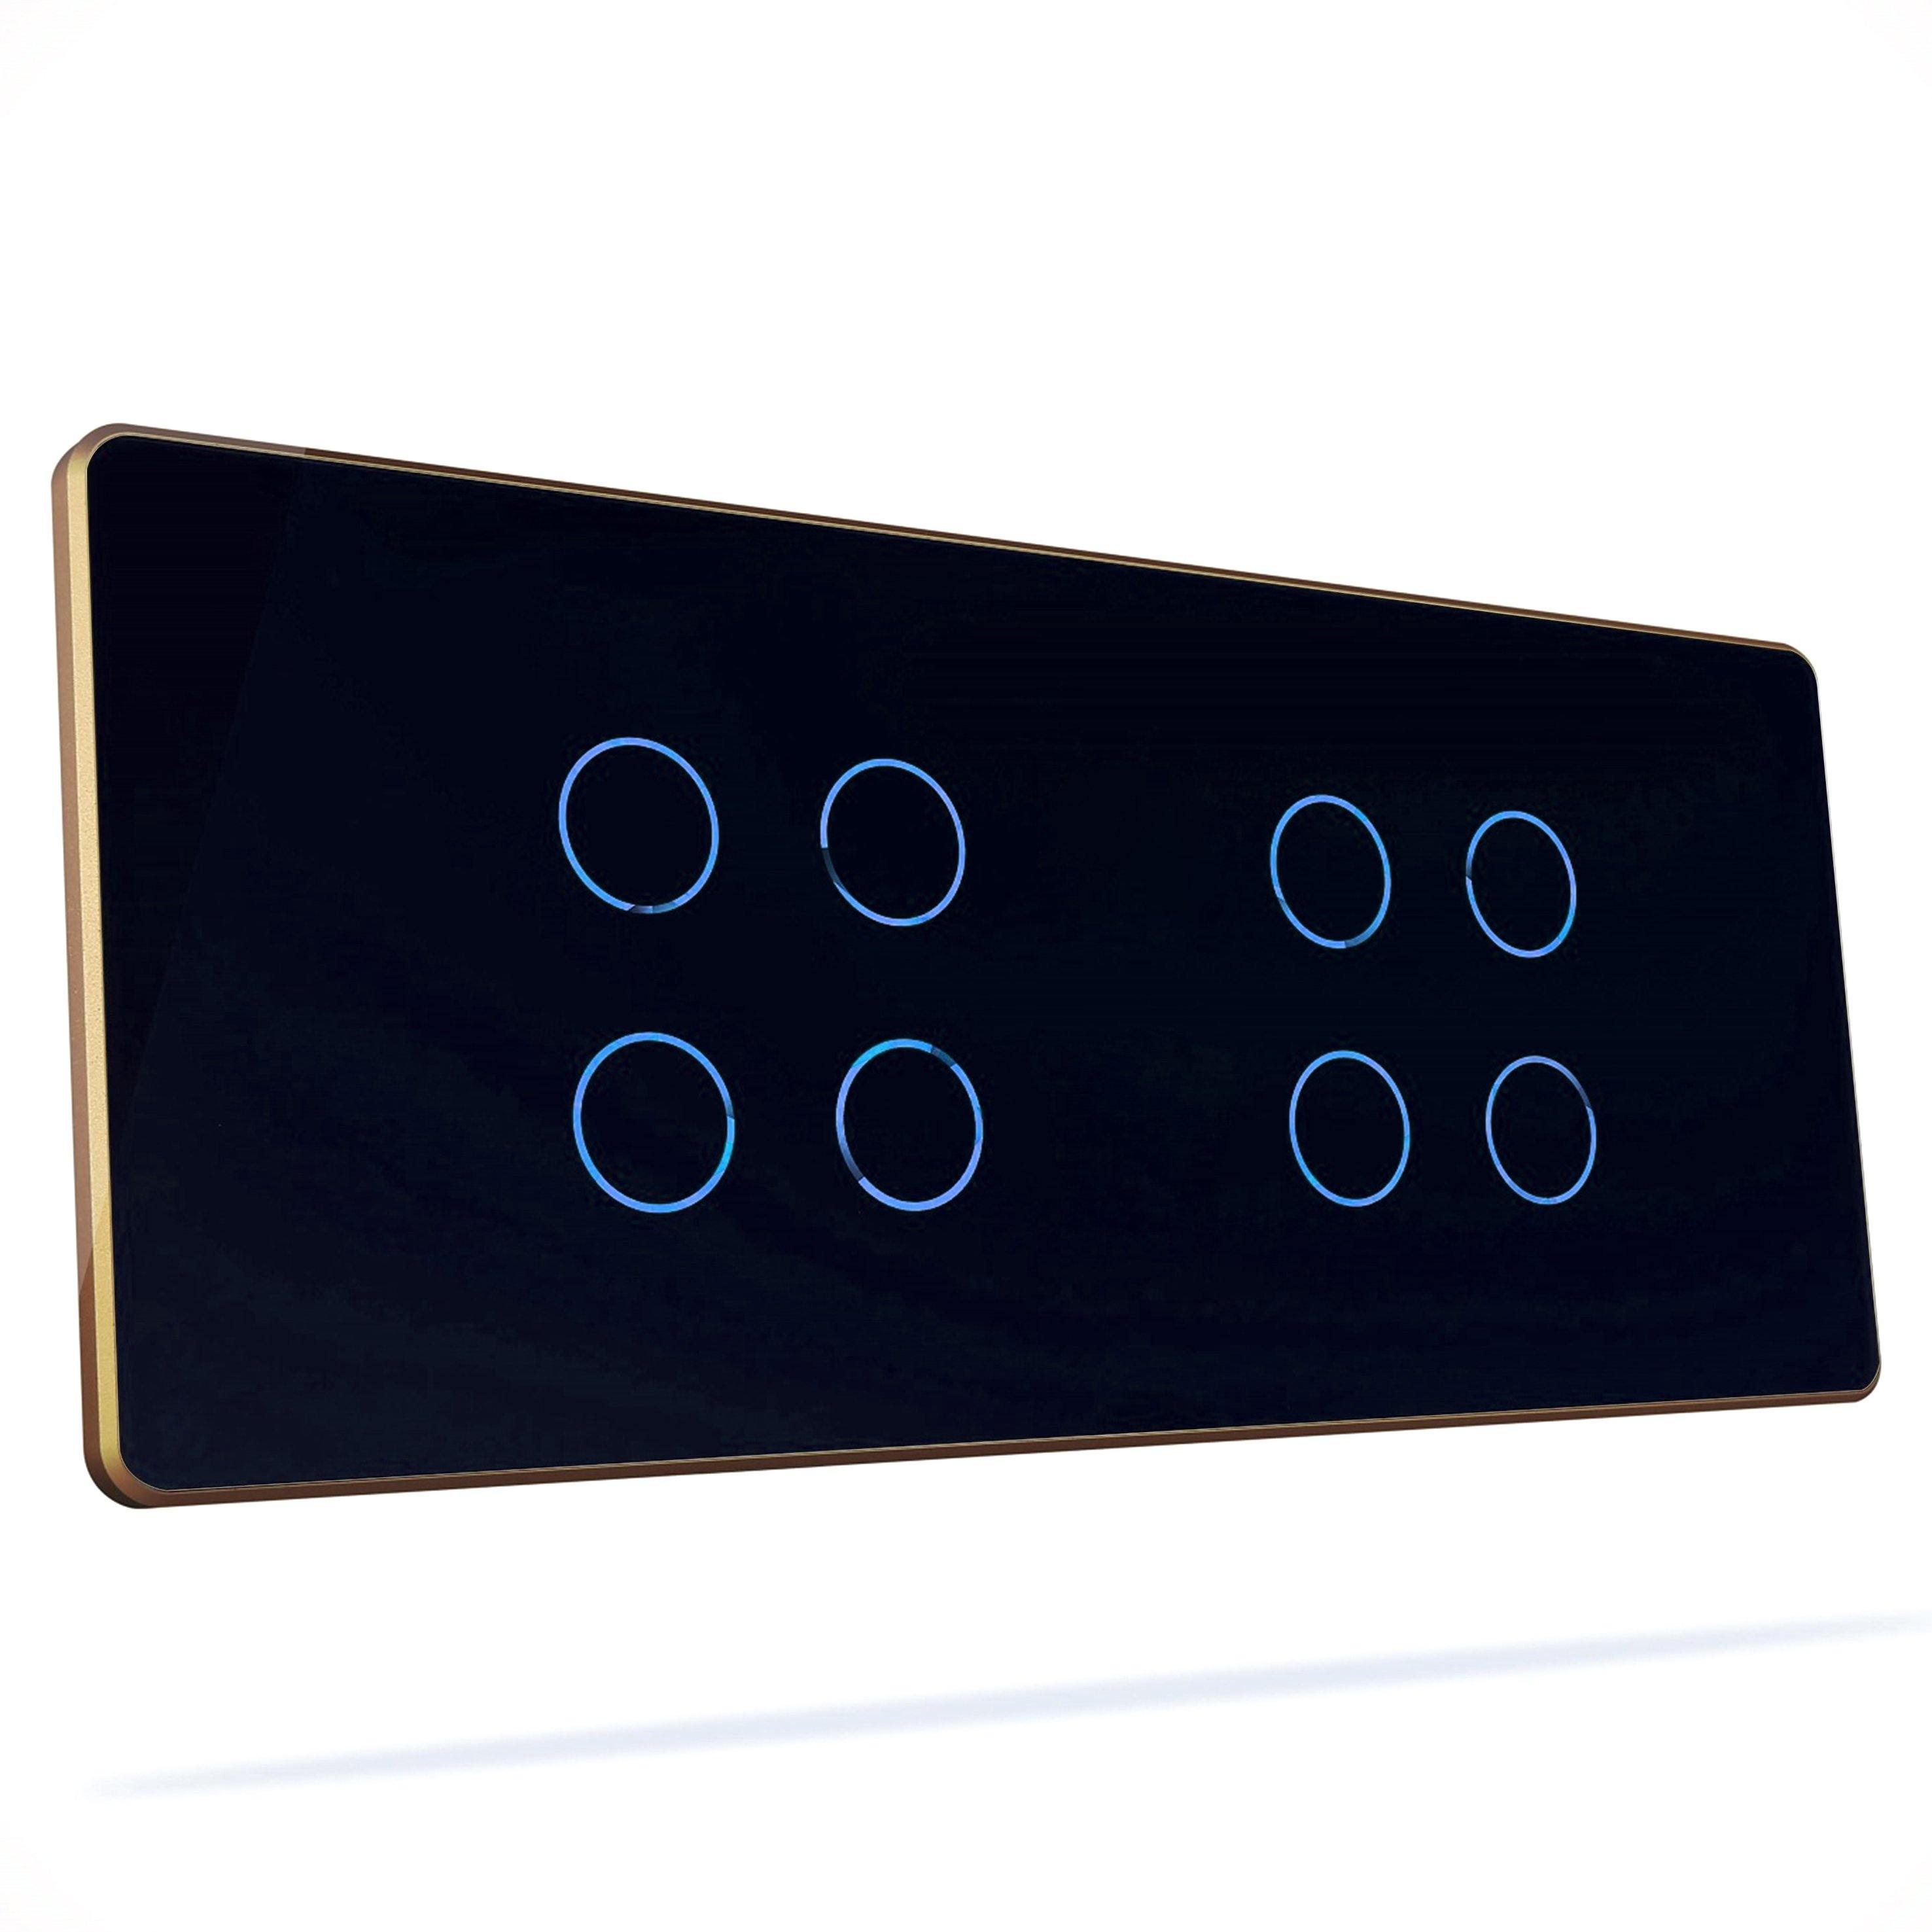 HOGAR SMART EIGHT TOUCH SWITCH PANLES WITH BUILT-IN AUTOMATION - Ankur Lighting